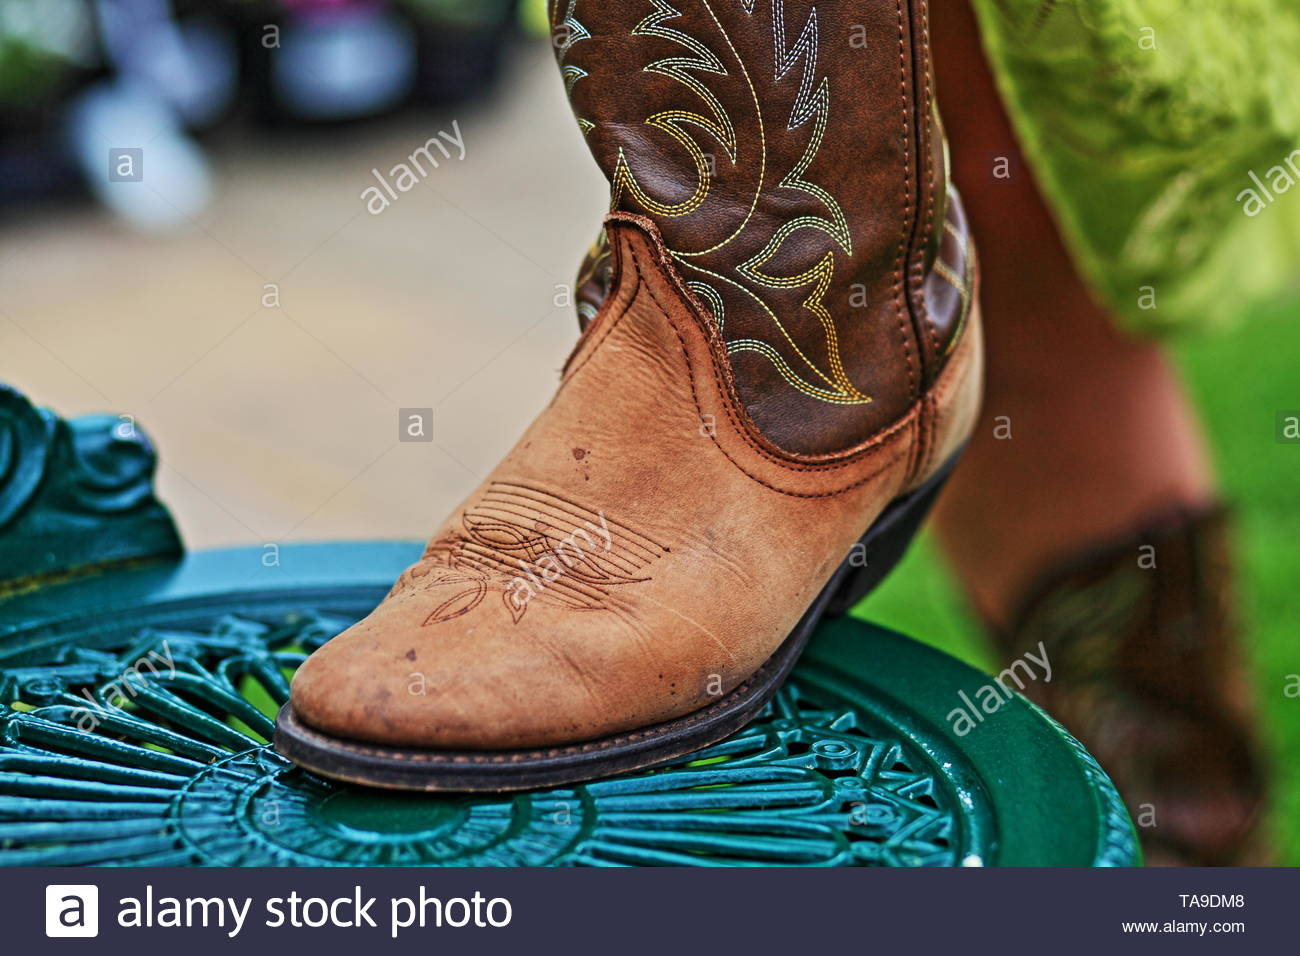 Image Of A Woman Foot In A Cowboy Boot On A Wrought Iron Chair